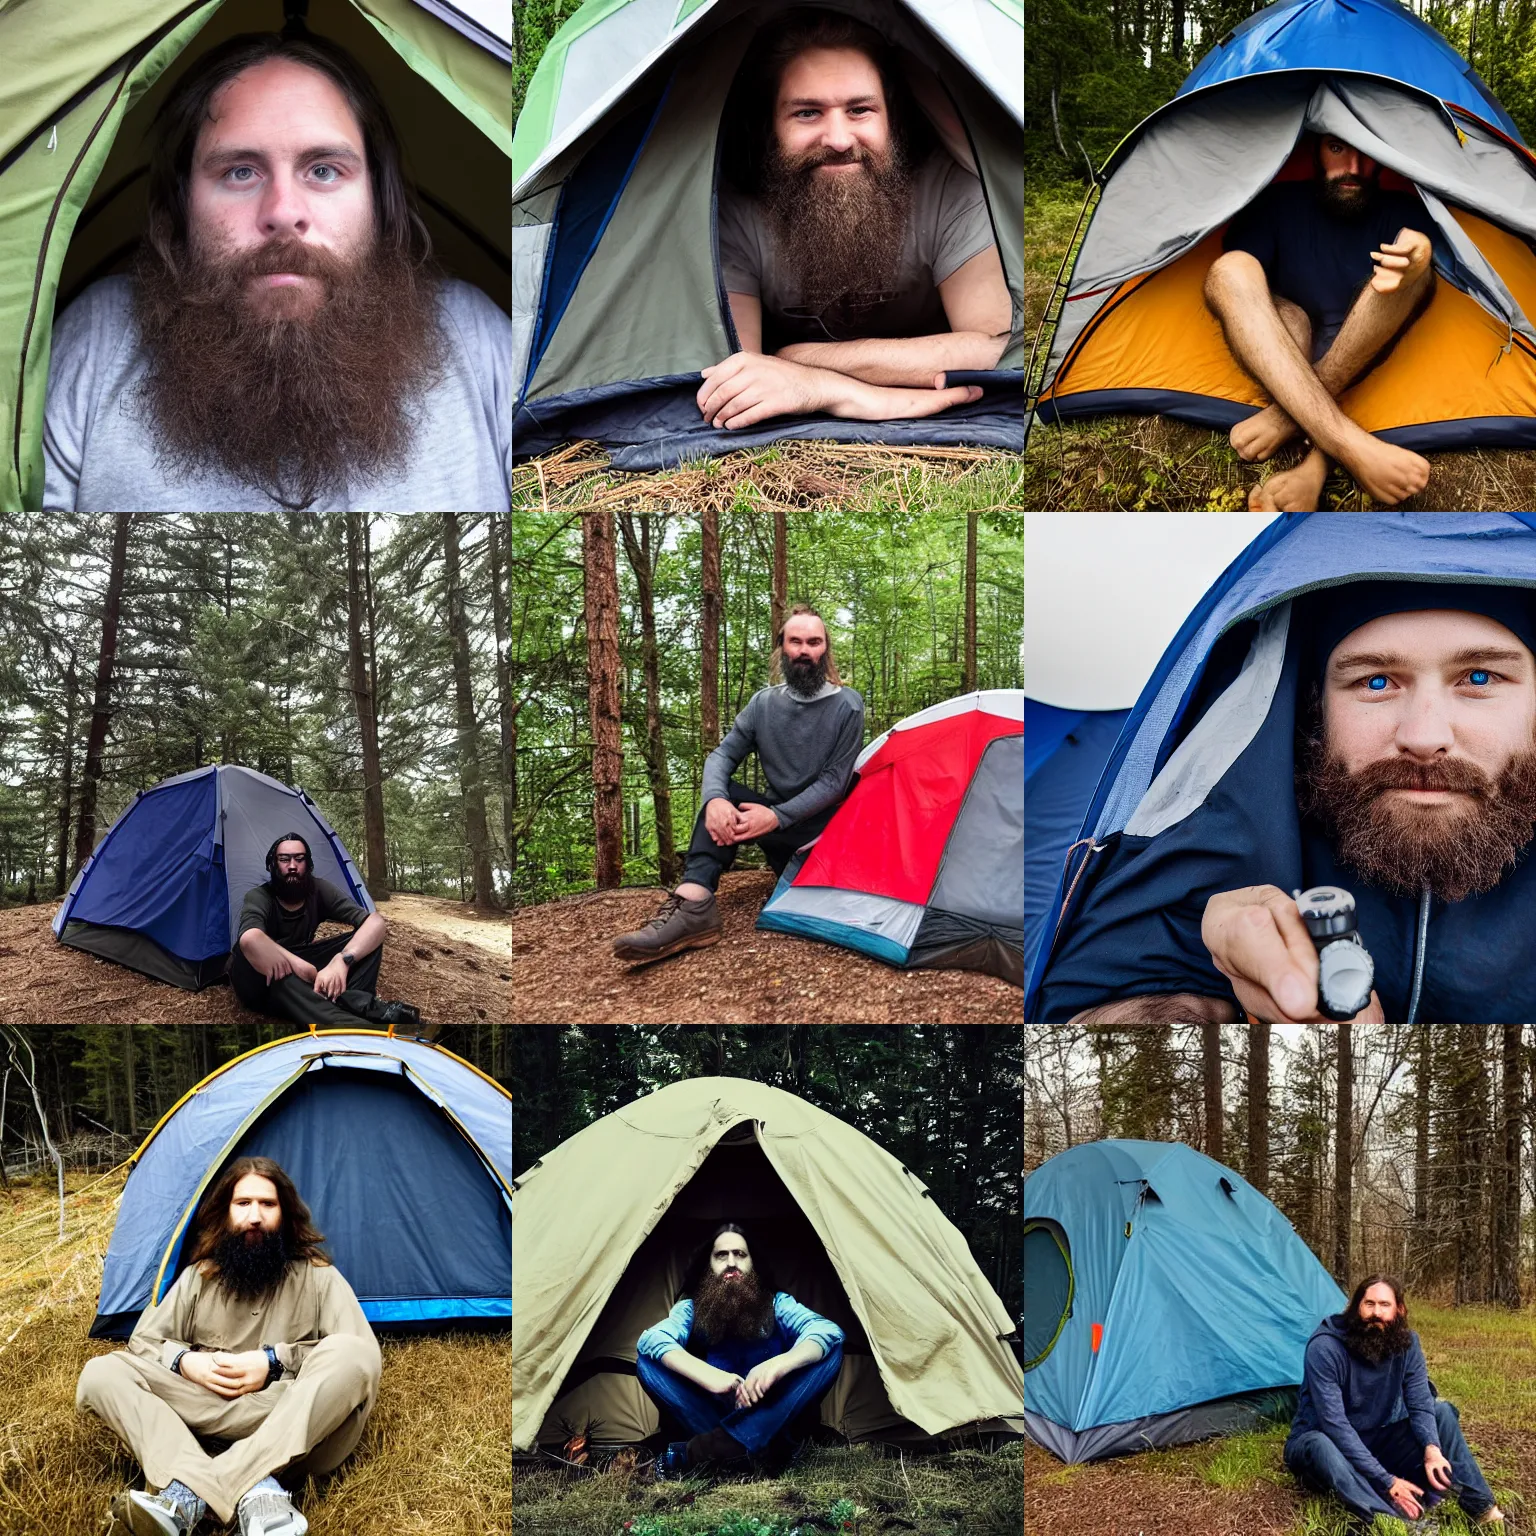 Prompt: the man is sitting in his tent and looking into the camera lens with an open window behind him, he has long hair and beard